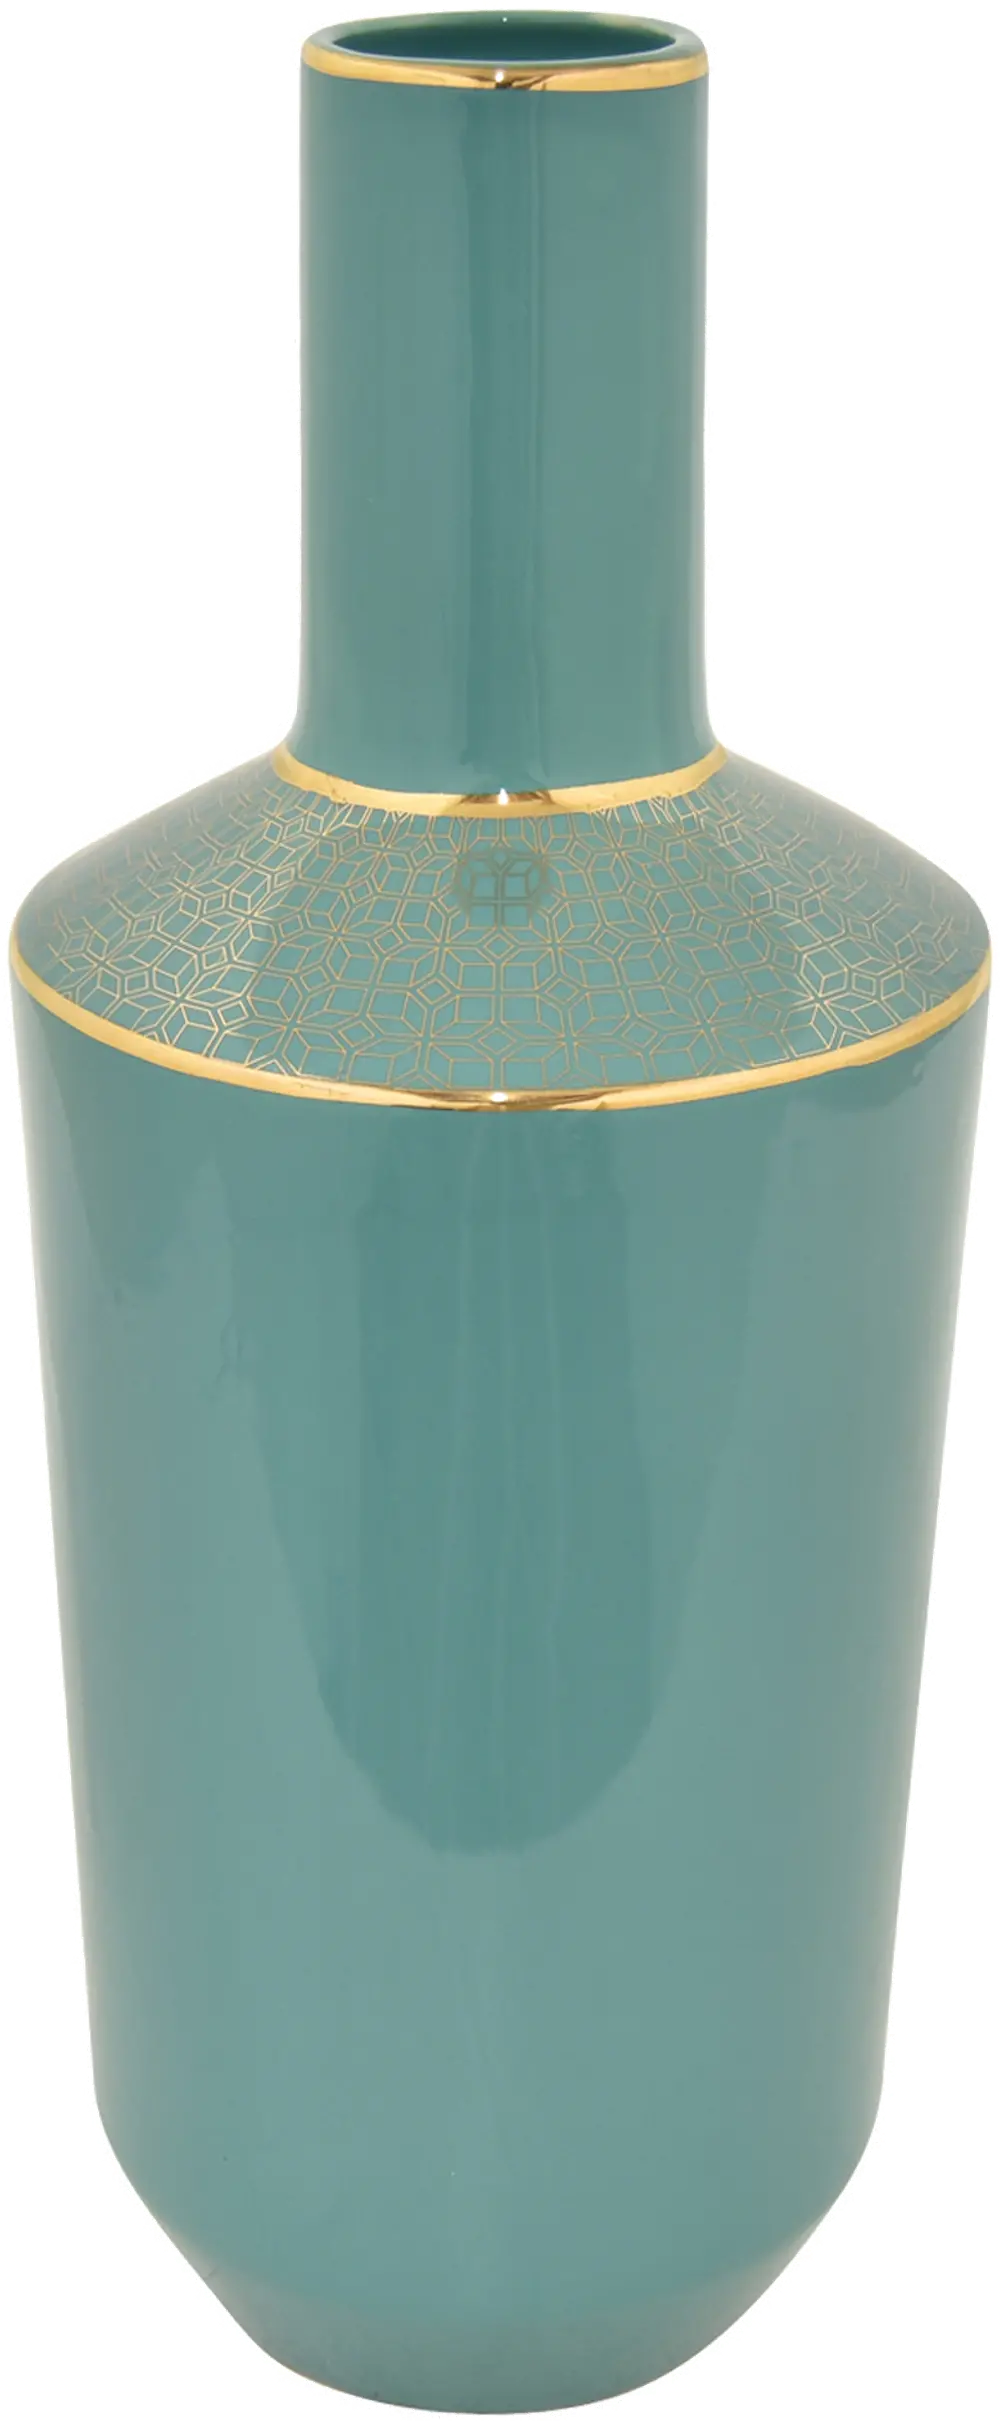 18 Inch Turquoise and Gold Porcelain Vase-1